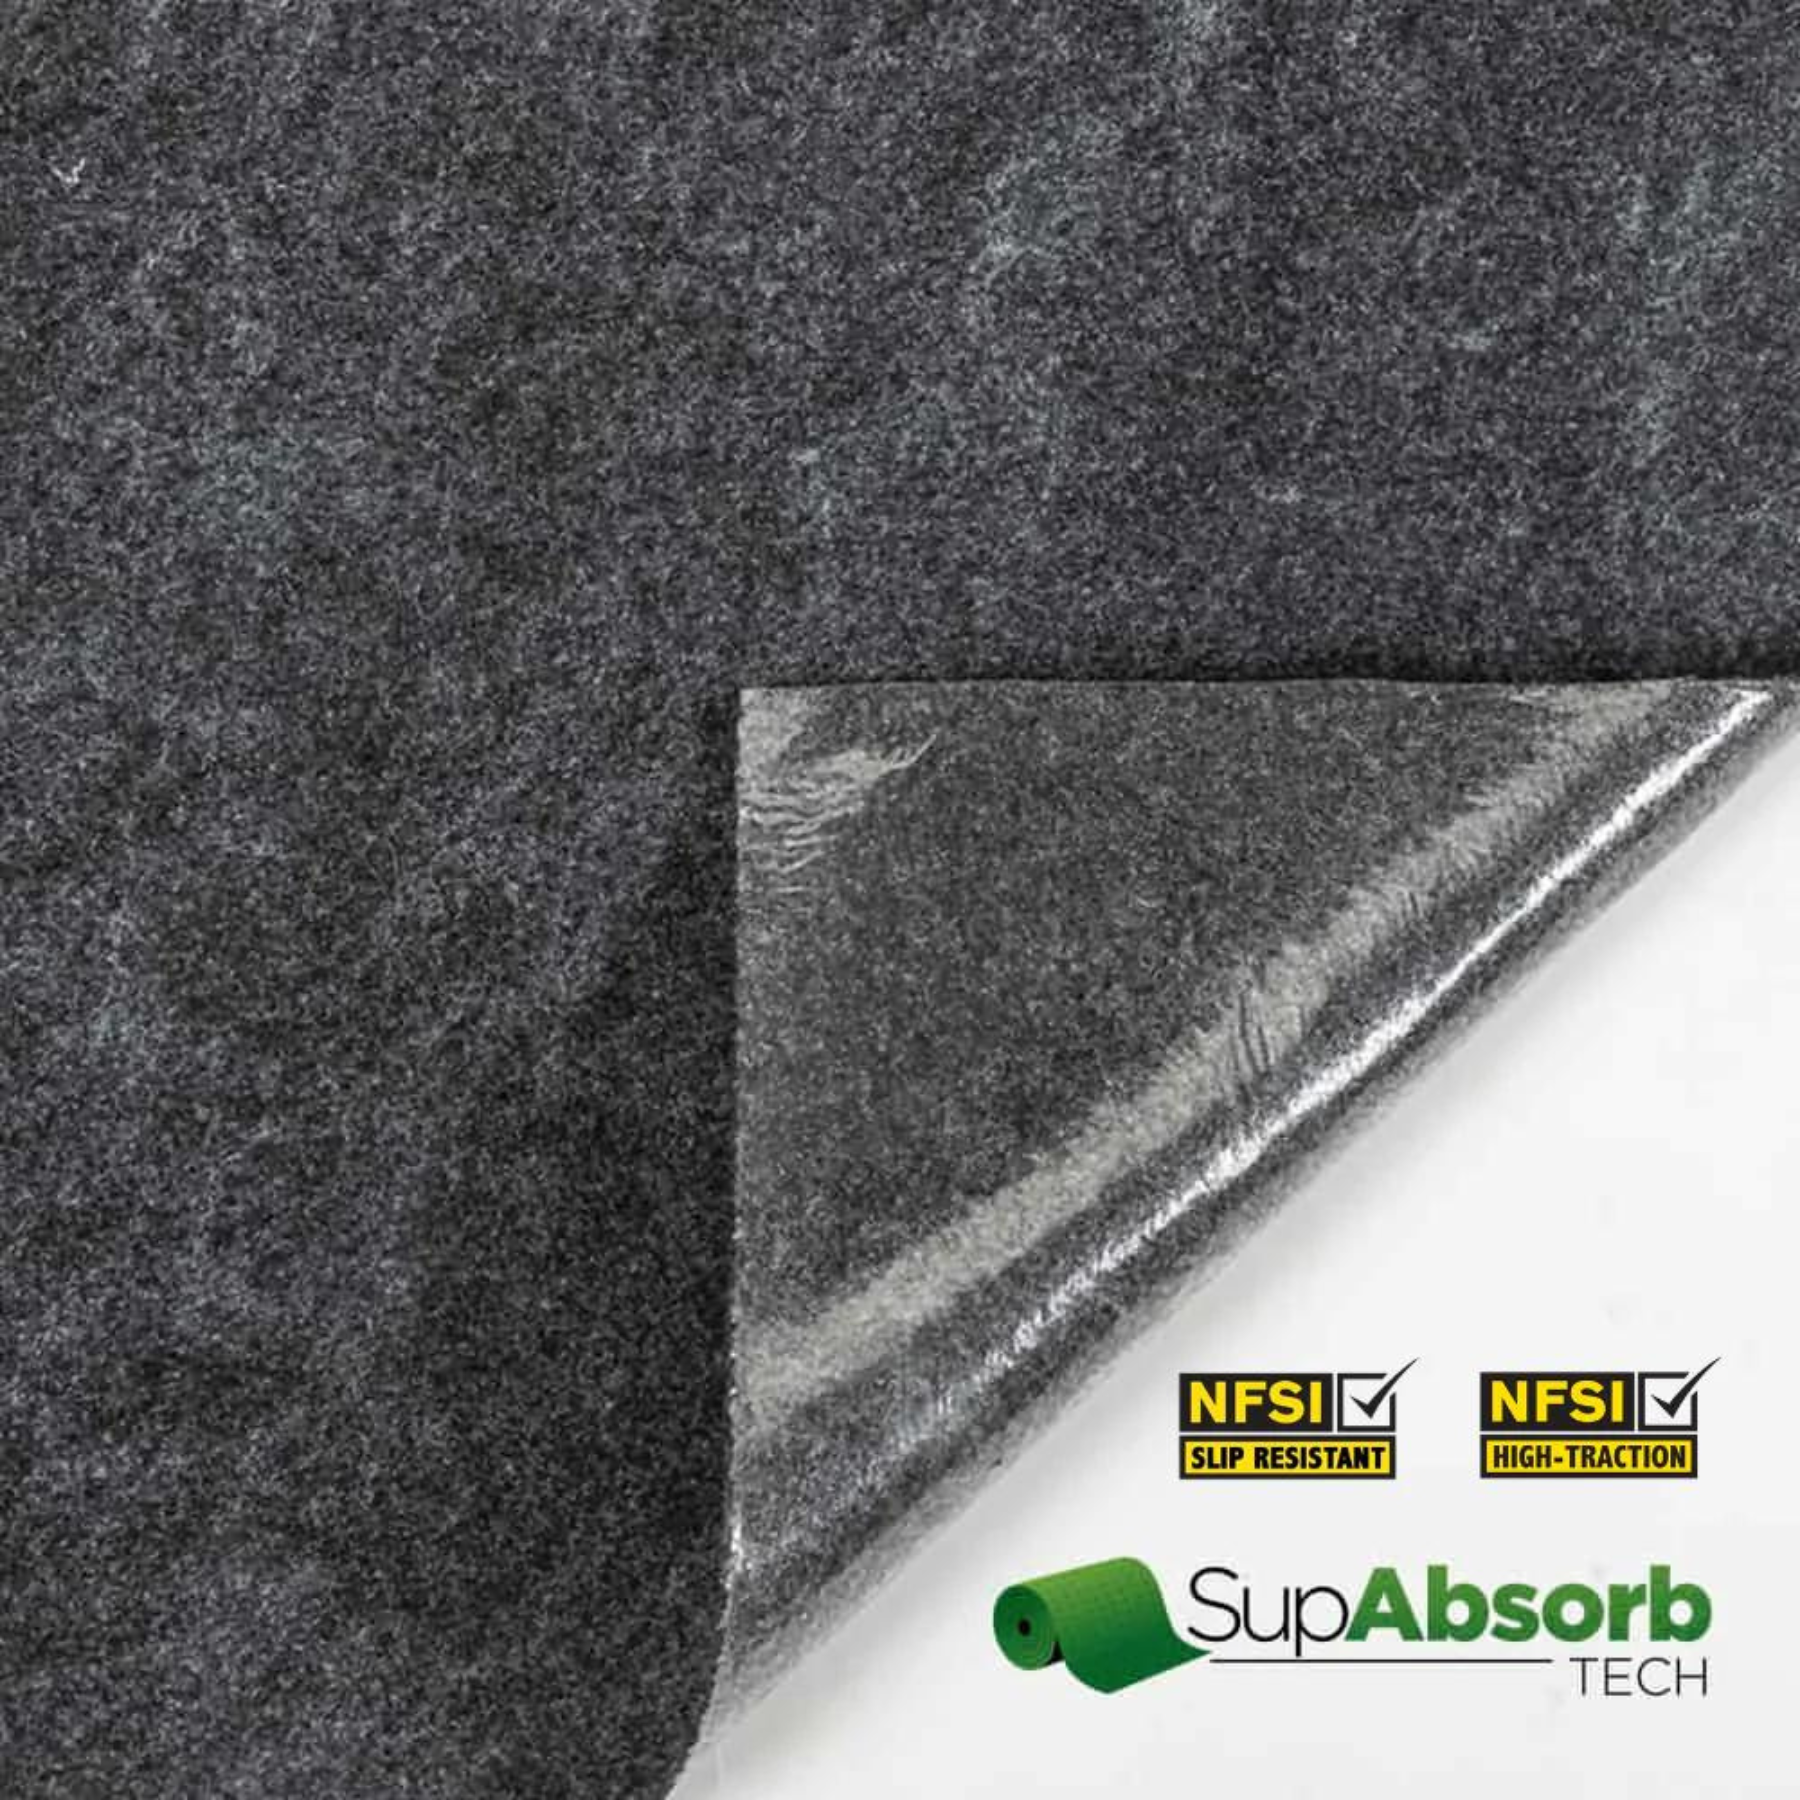 Why Wholesalers Should Sell StickyBack Anti-Slip Absorbent Mats